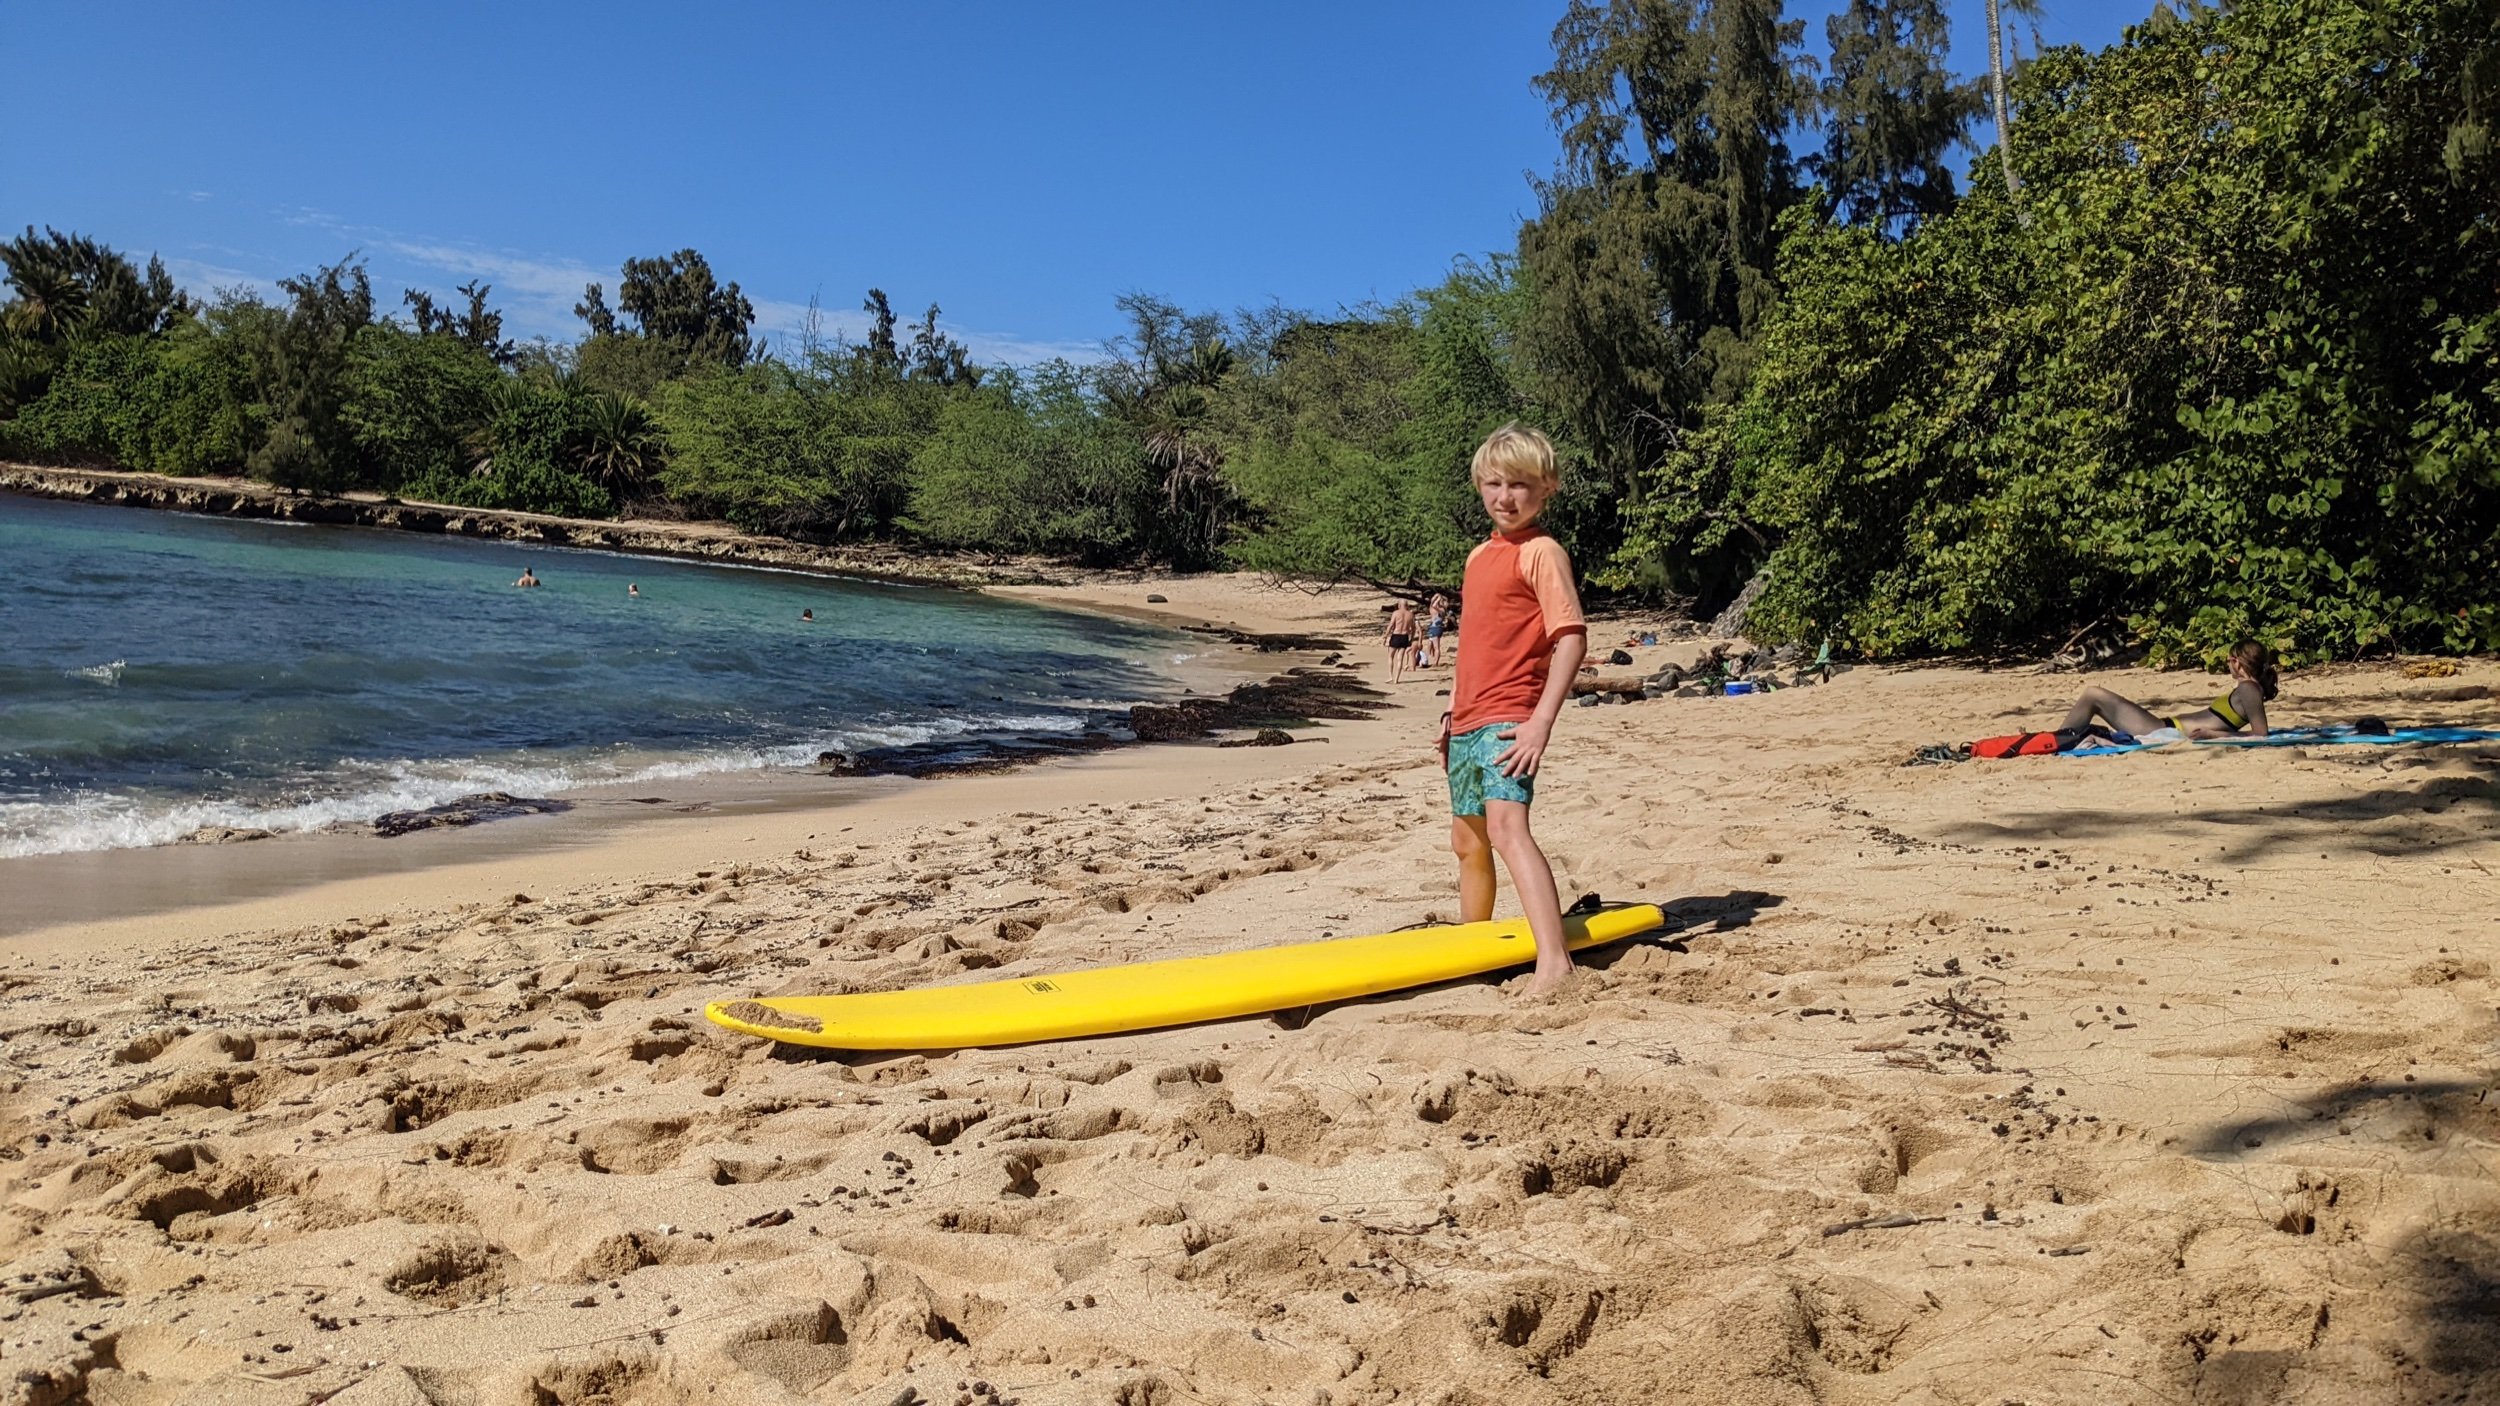  Gus at Pua’ena Point, North Shore Oahu, with his 7’ foamie 